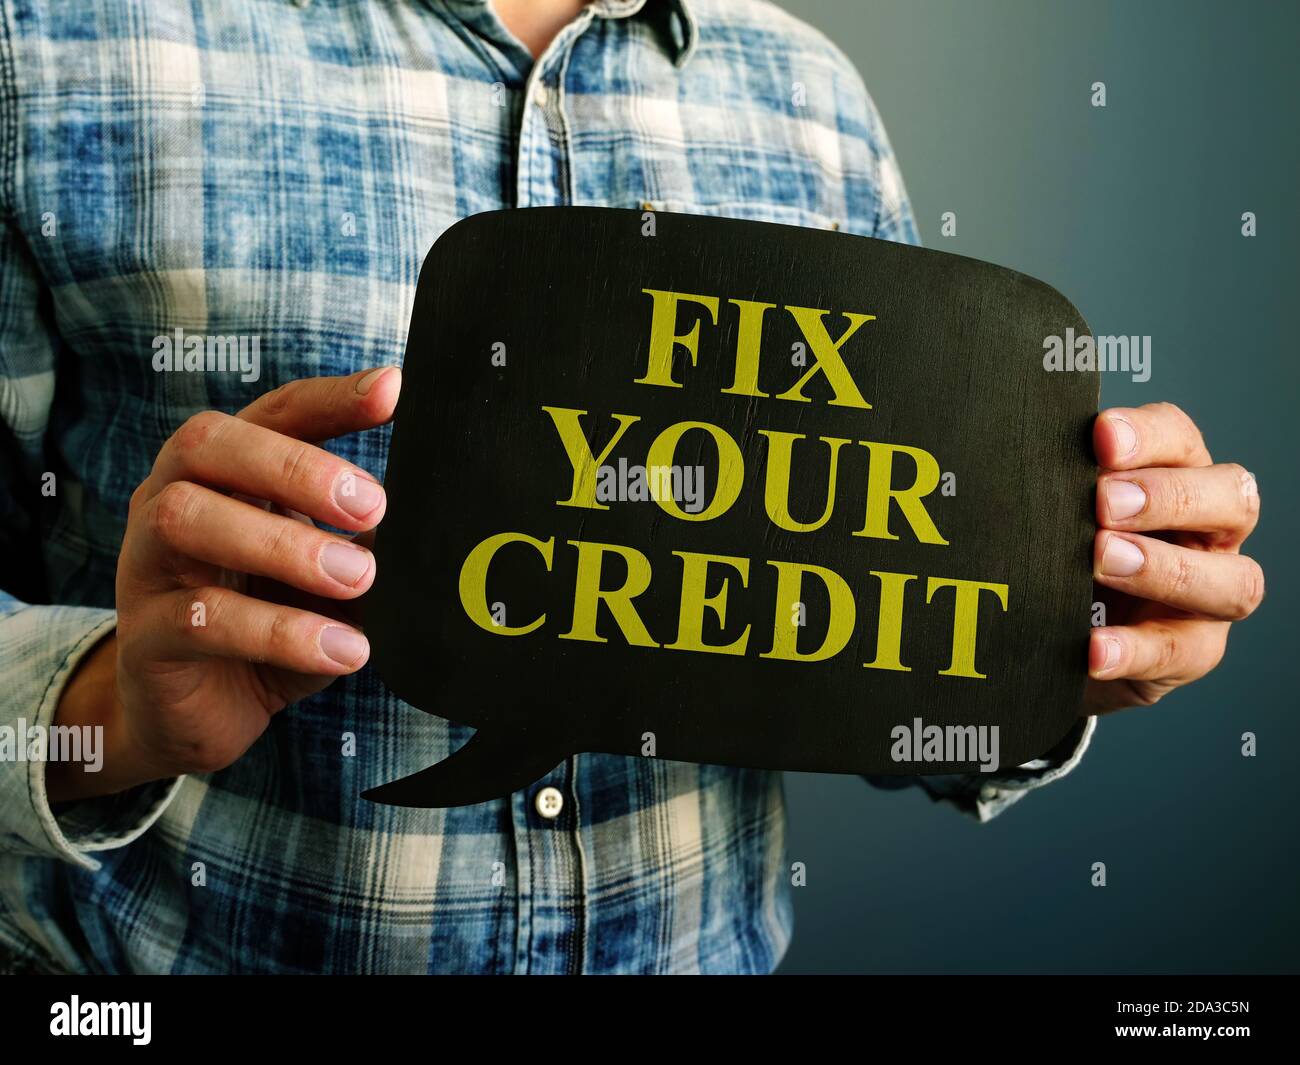 Fix your credit debt words on the wooden quote bulb. Stock Photo